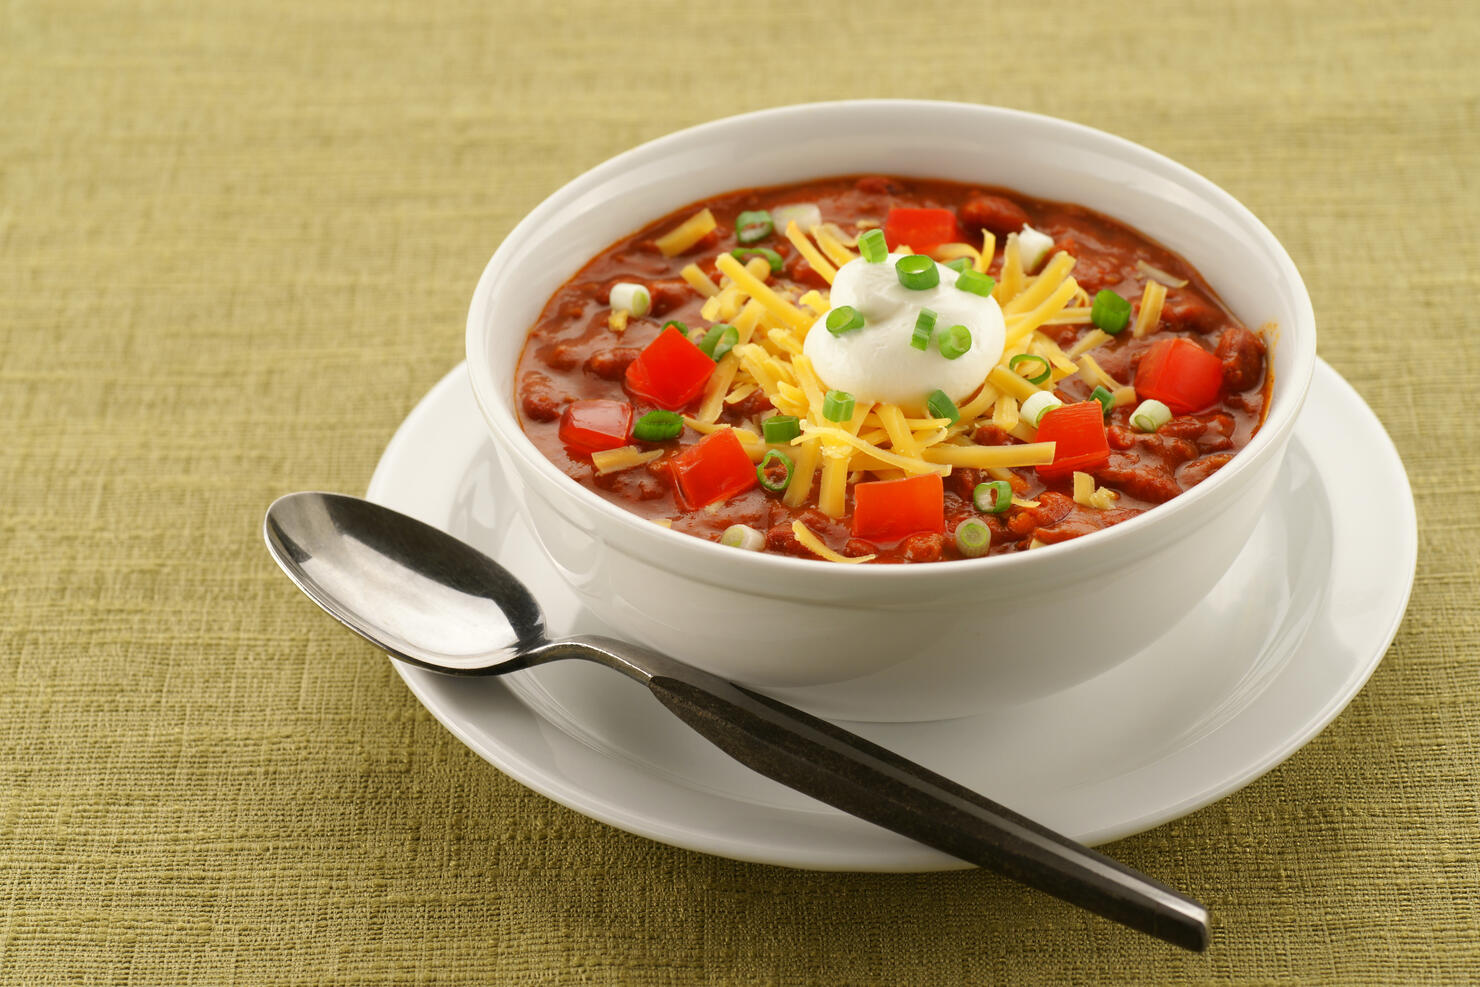 Bowl of Chili on Retro Green Tablecloth